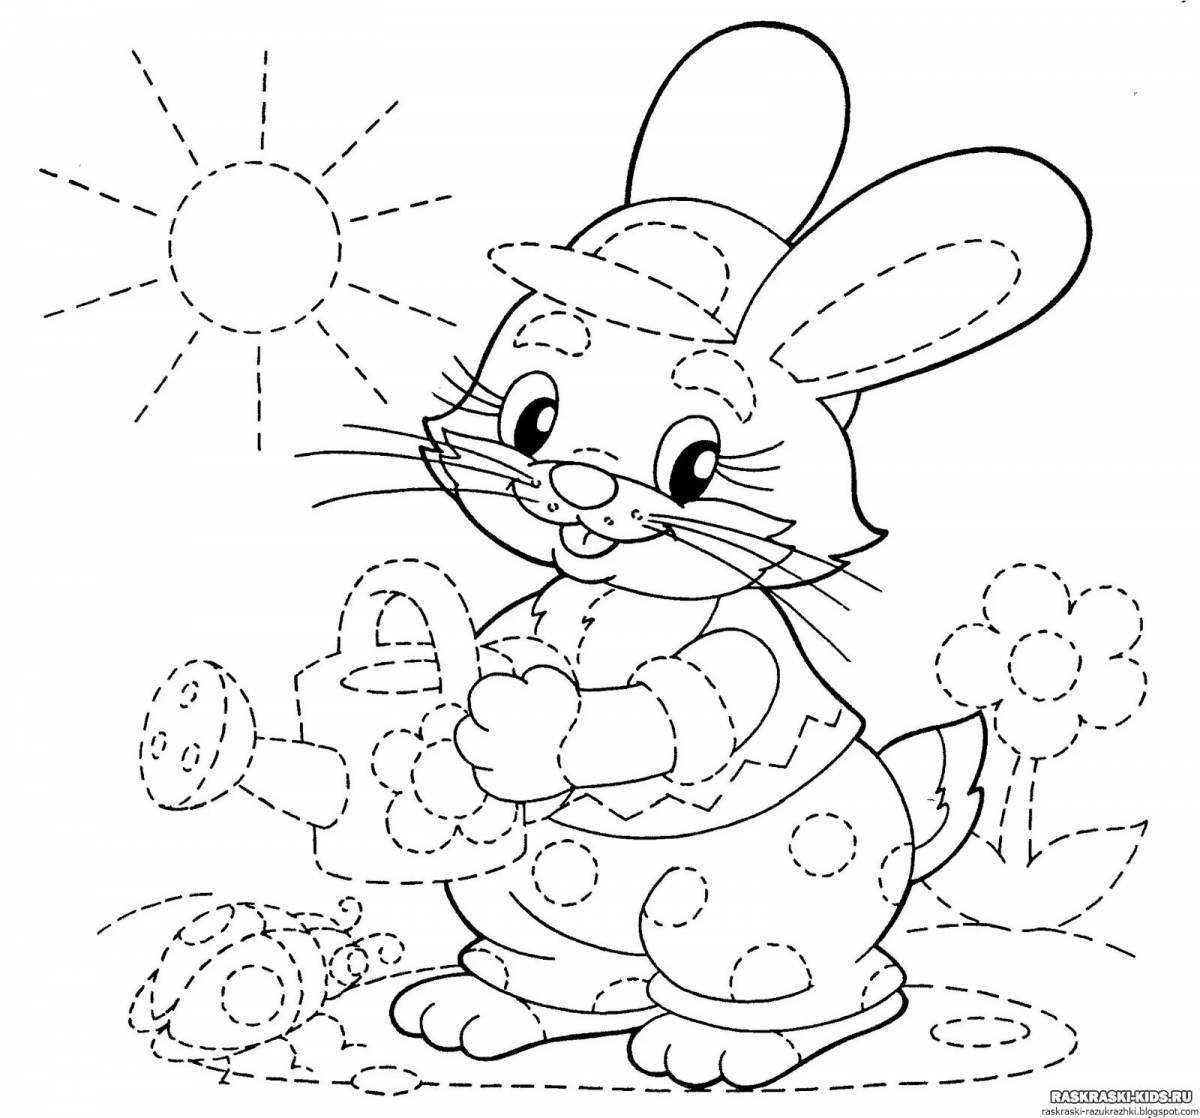 Color-frenzy coloring for children 5 years old